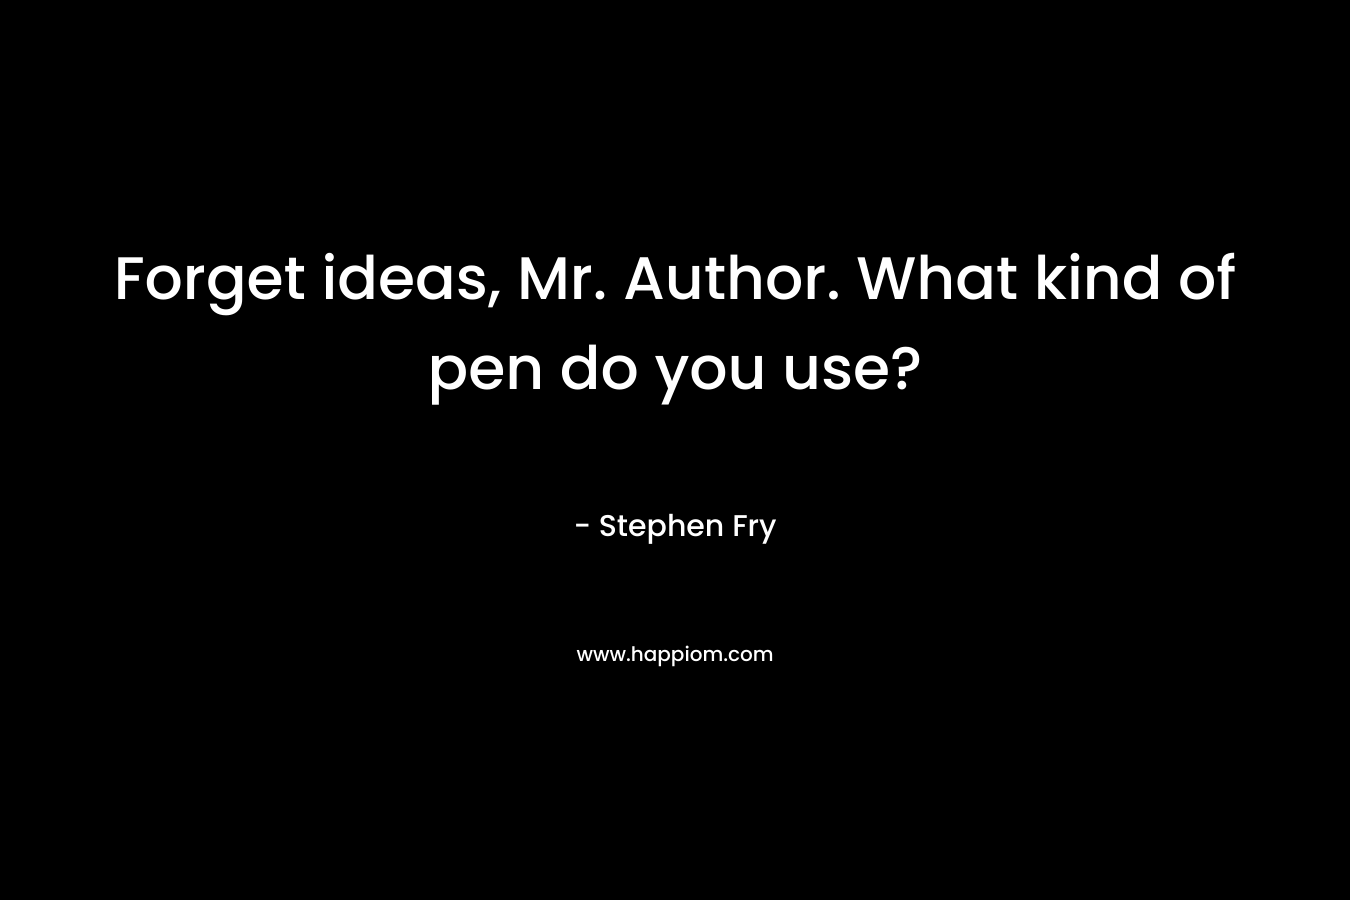 Forget ideas, Mr. Author. What kind of pen do you use? – Stephen Fry